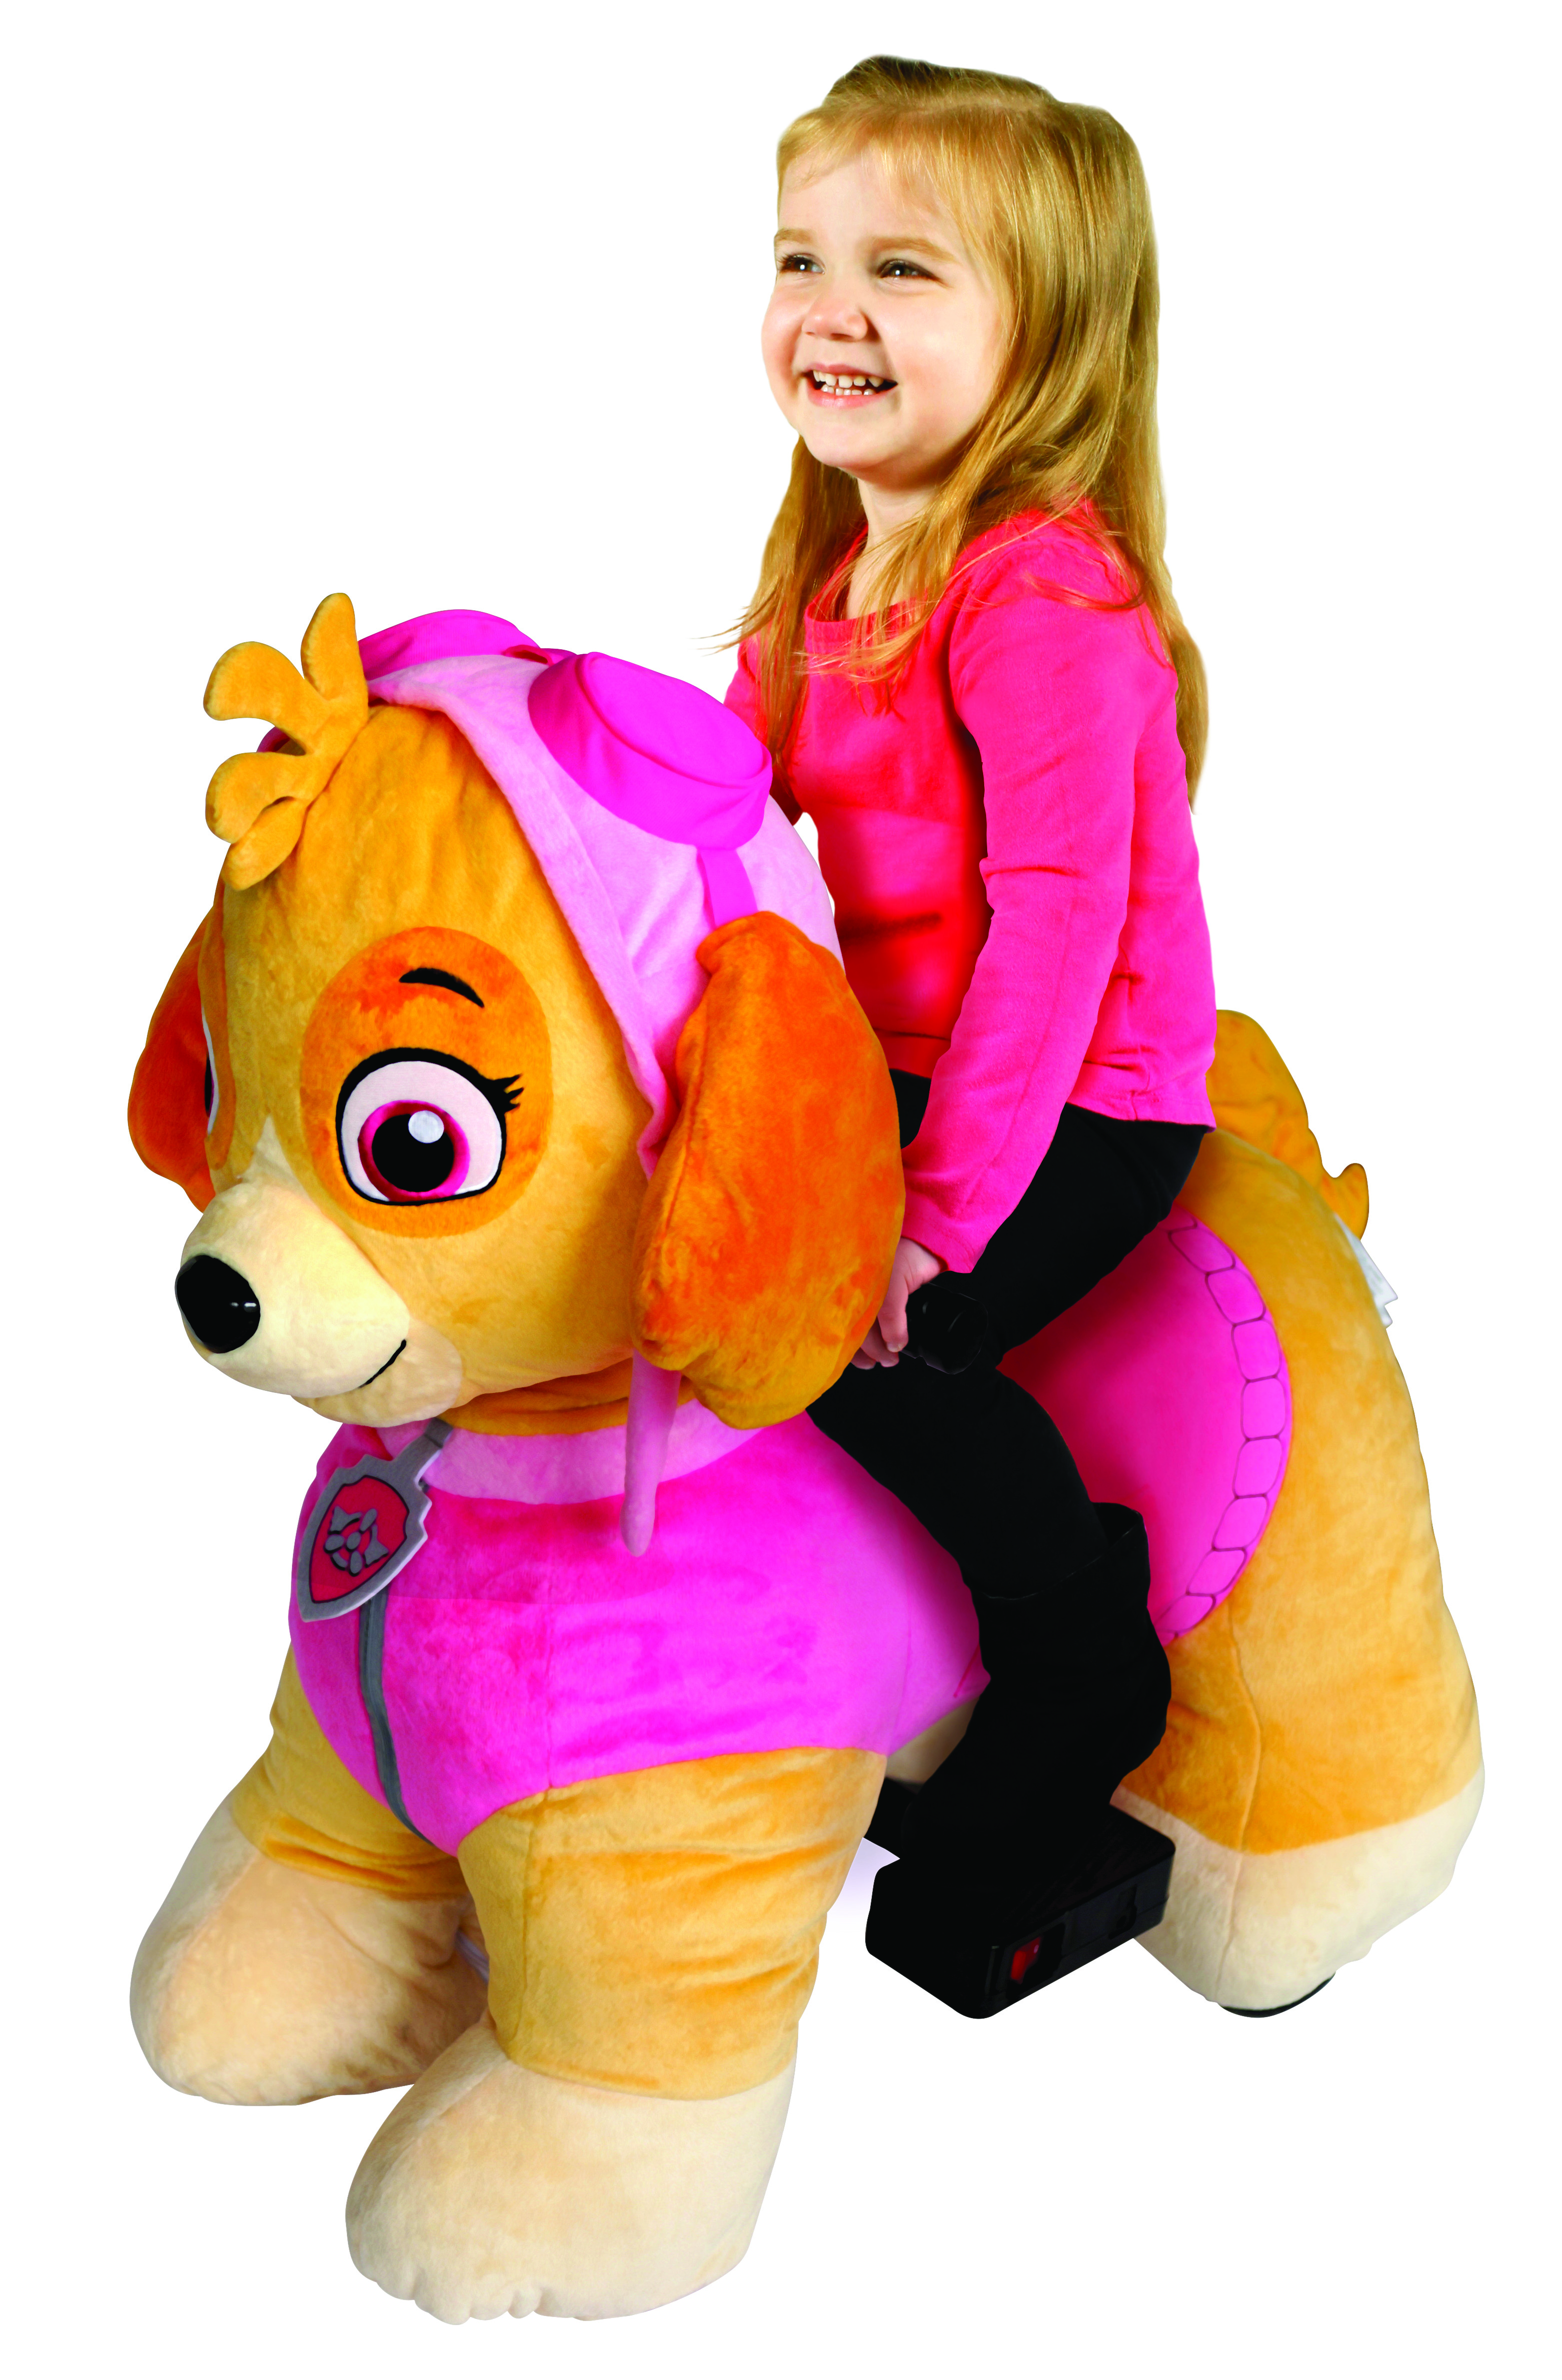 Paw Patrol 6 Volt Plush Skye Ride-on with Pup House Included by Dynacraft! - image 1 of 7